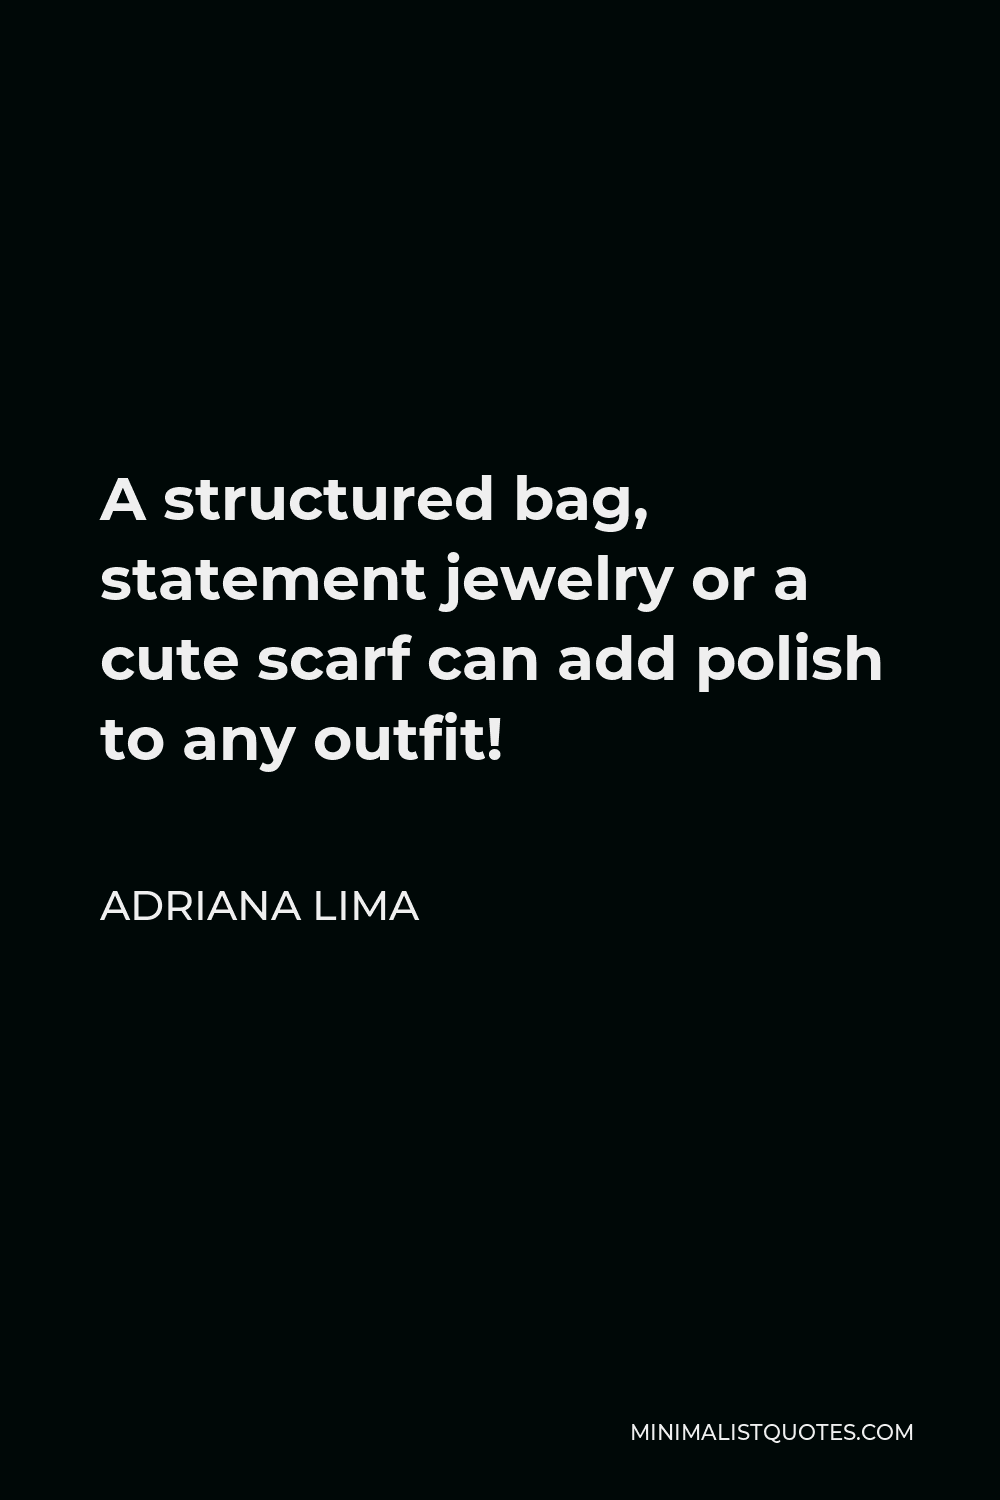 Adriana Lima Quote - A structured bag, statement jewelry or a cute scarf can add polish to any outfit!